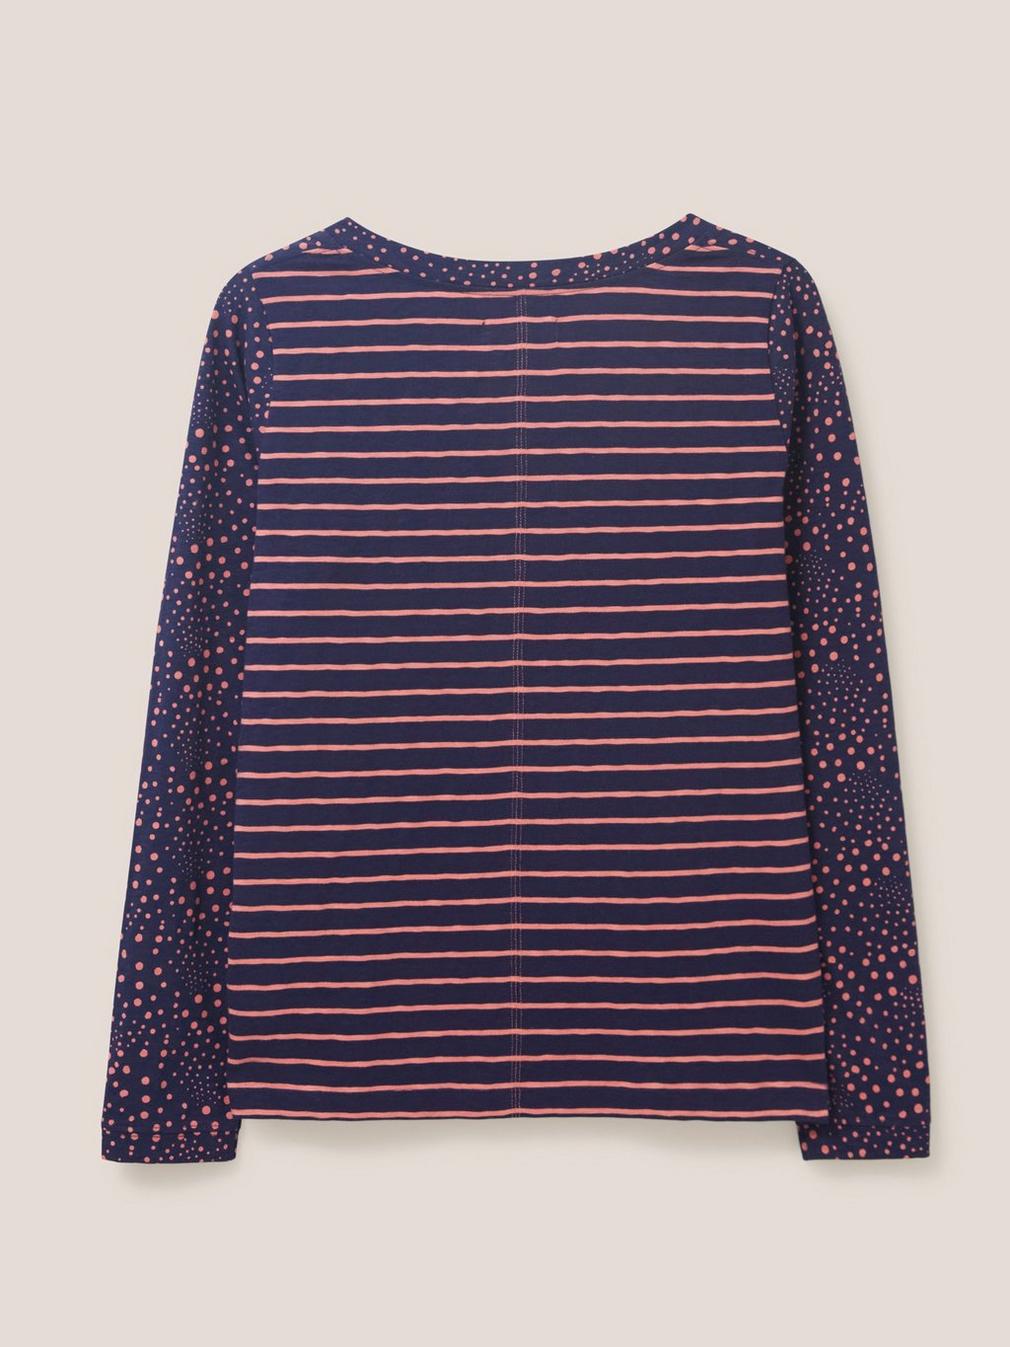 Nelly Long Sleeve T-Shirt in NAVY MULTI - FLAT BACK